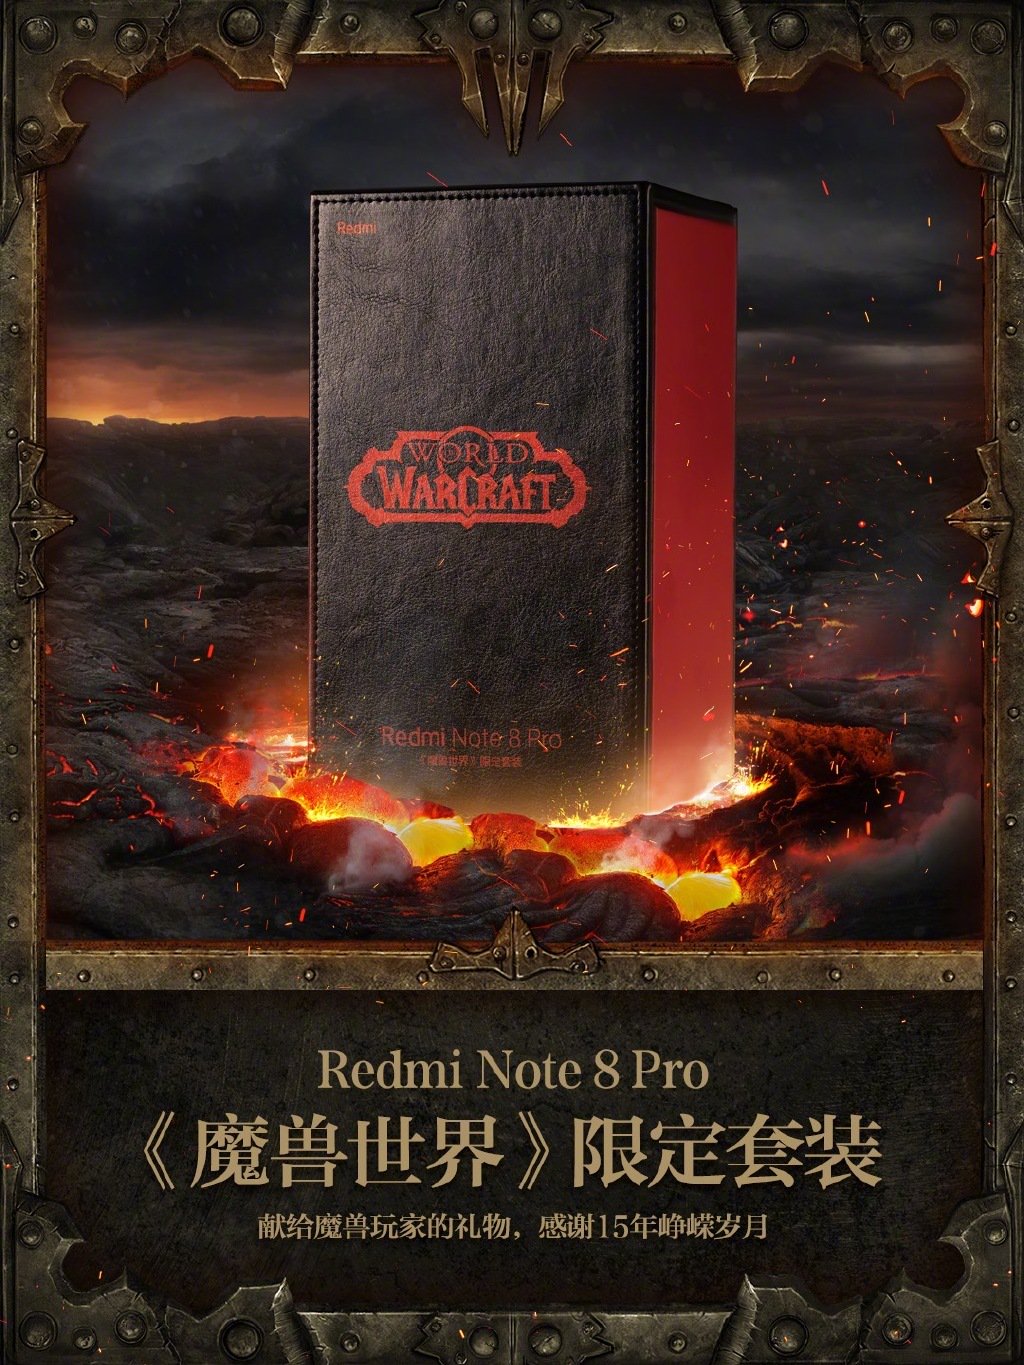 Redmi-Note-8-Pro-World-of-Warcraft-Limited-Edition-a